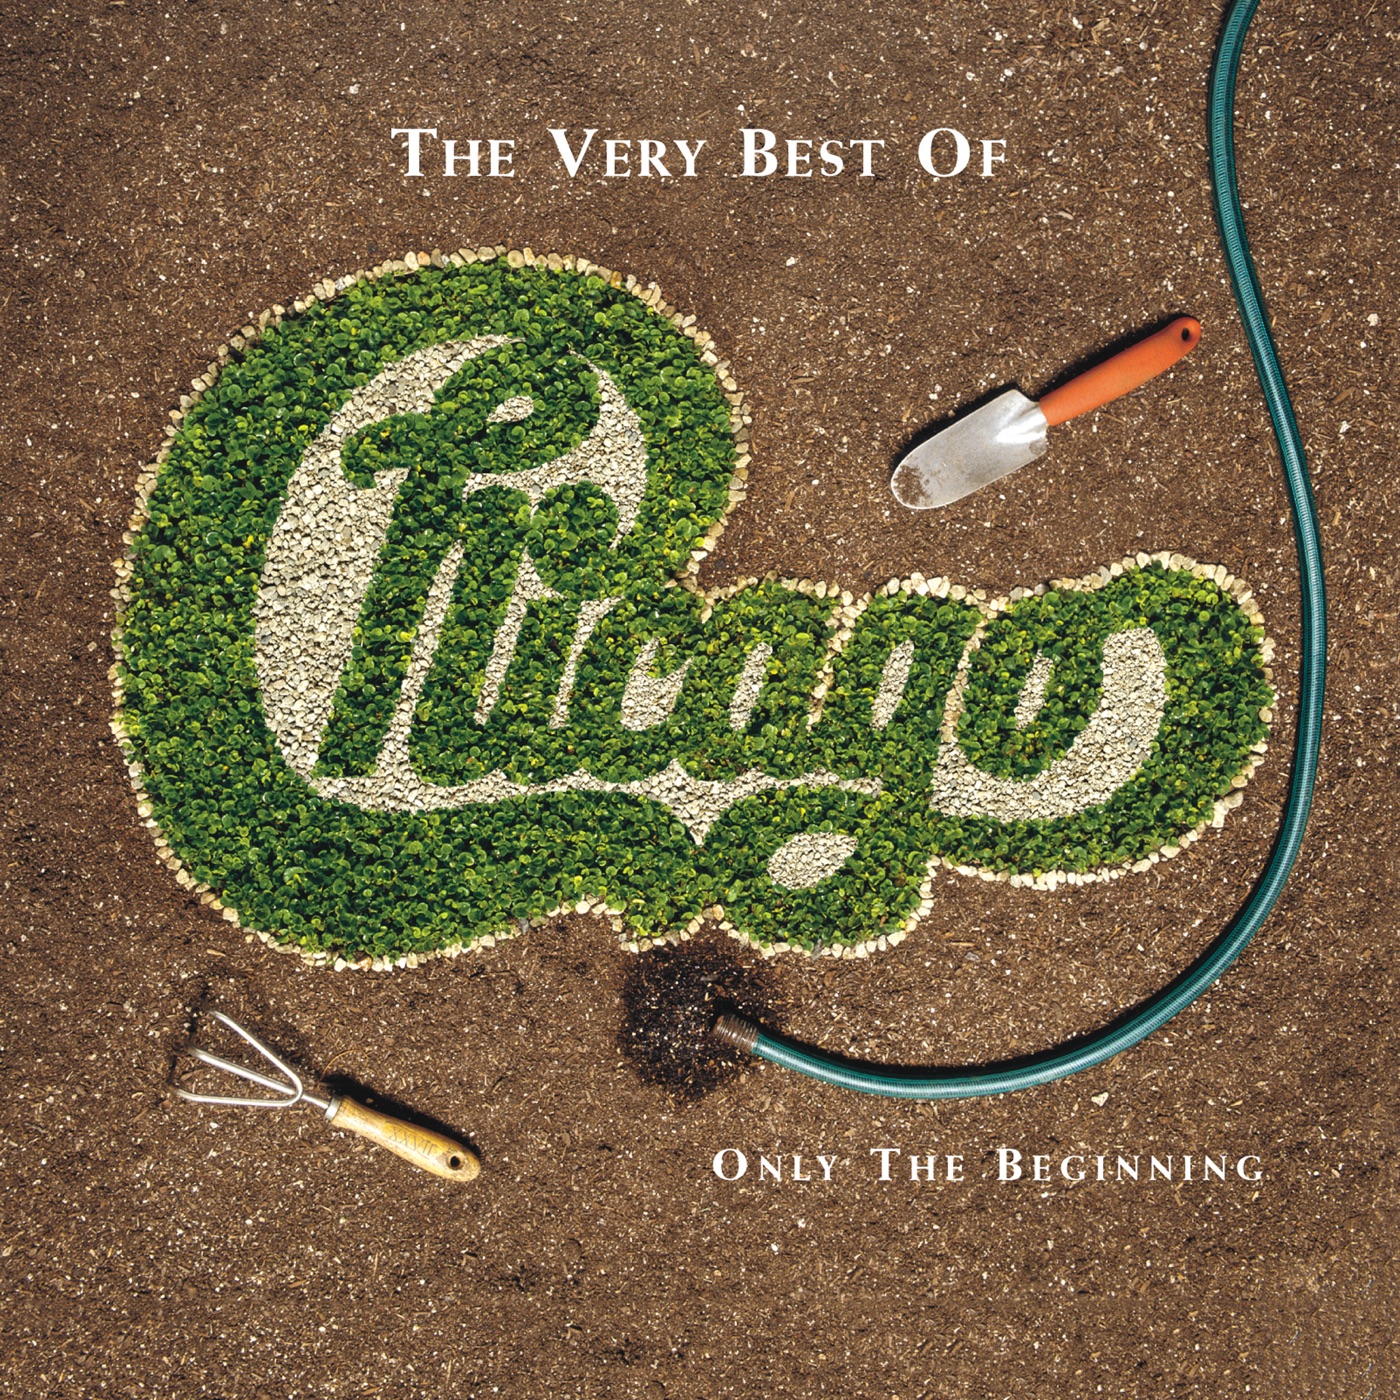 az_1121_The Very Best of Chicago Only the Beginning_Chicago